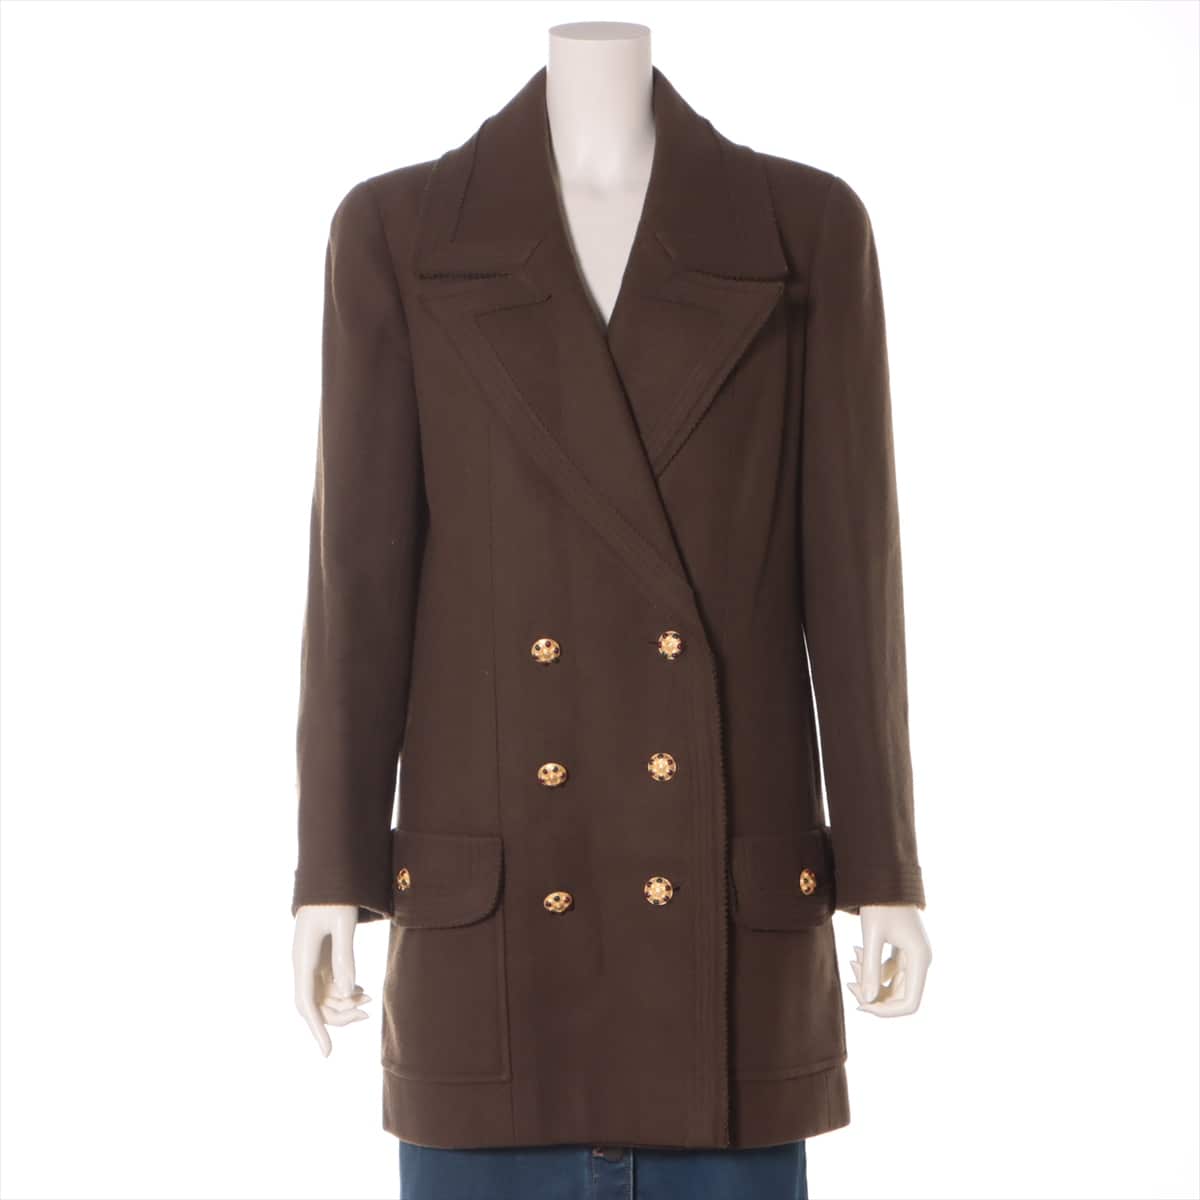 Chanel Unknown material coats Unknown size Ladies' Brown No sign tag Gripoix